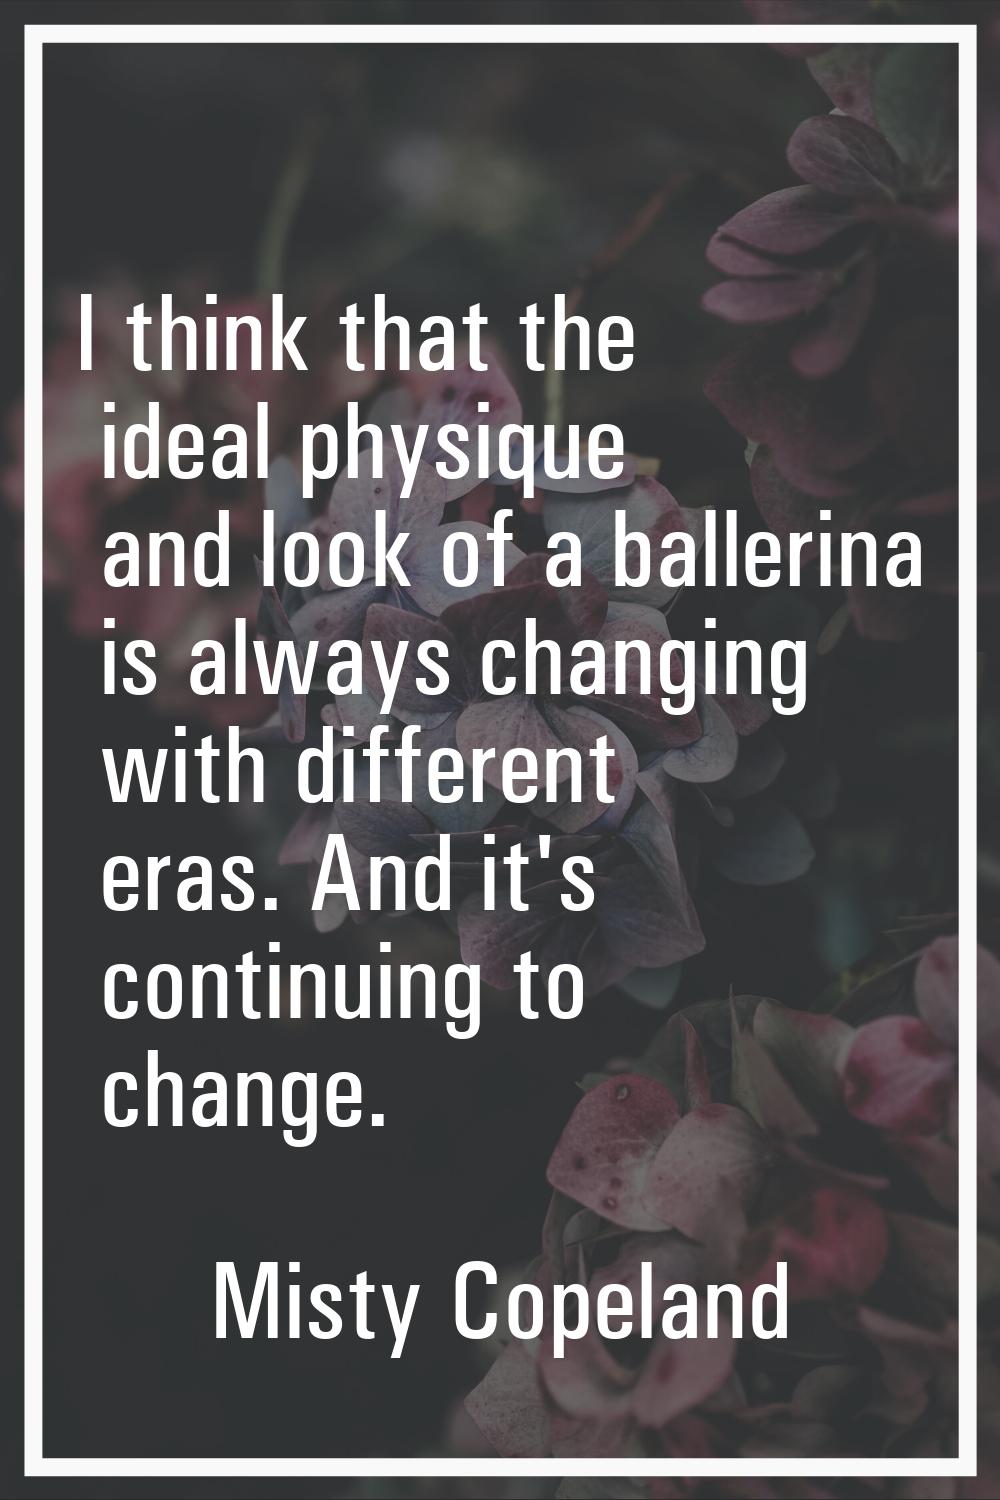 I think that the ideal physique and look of a ballerina is always changing with different eras. And